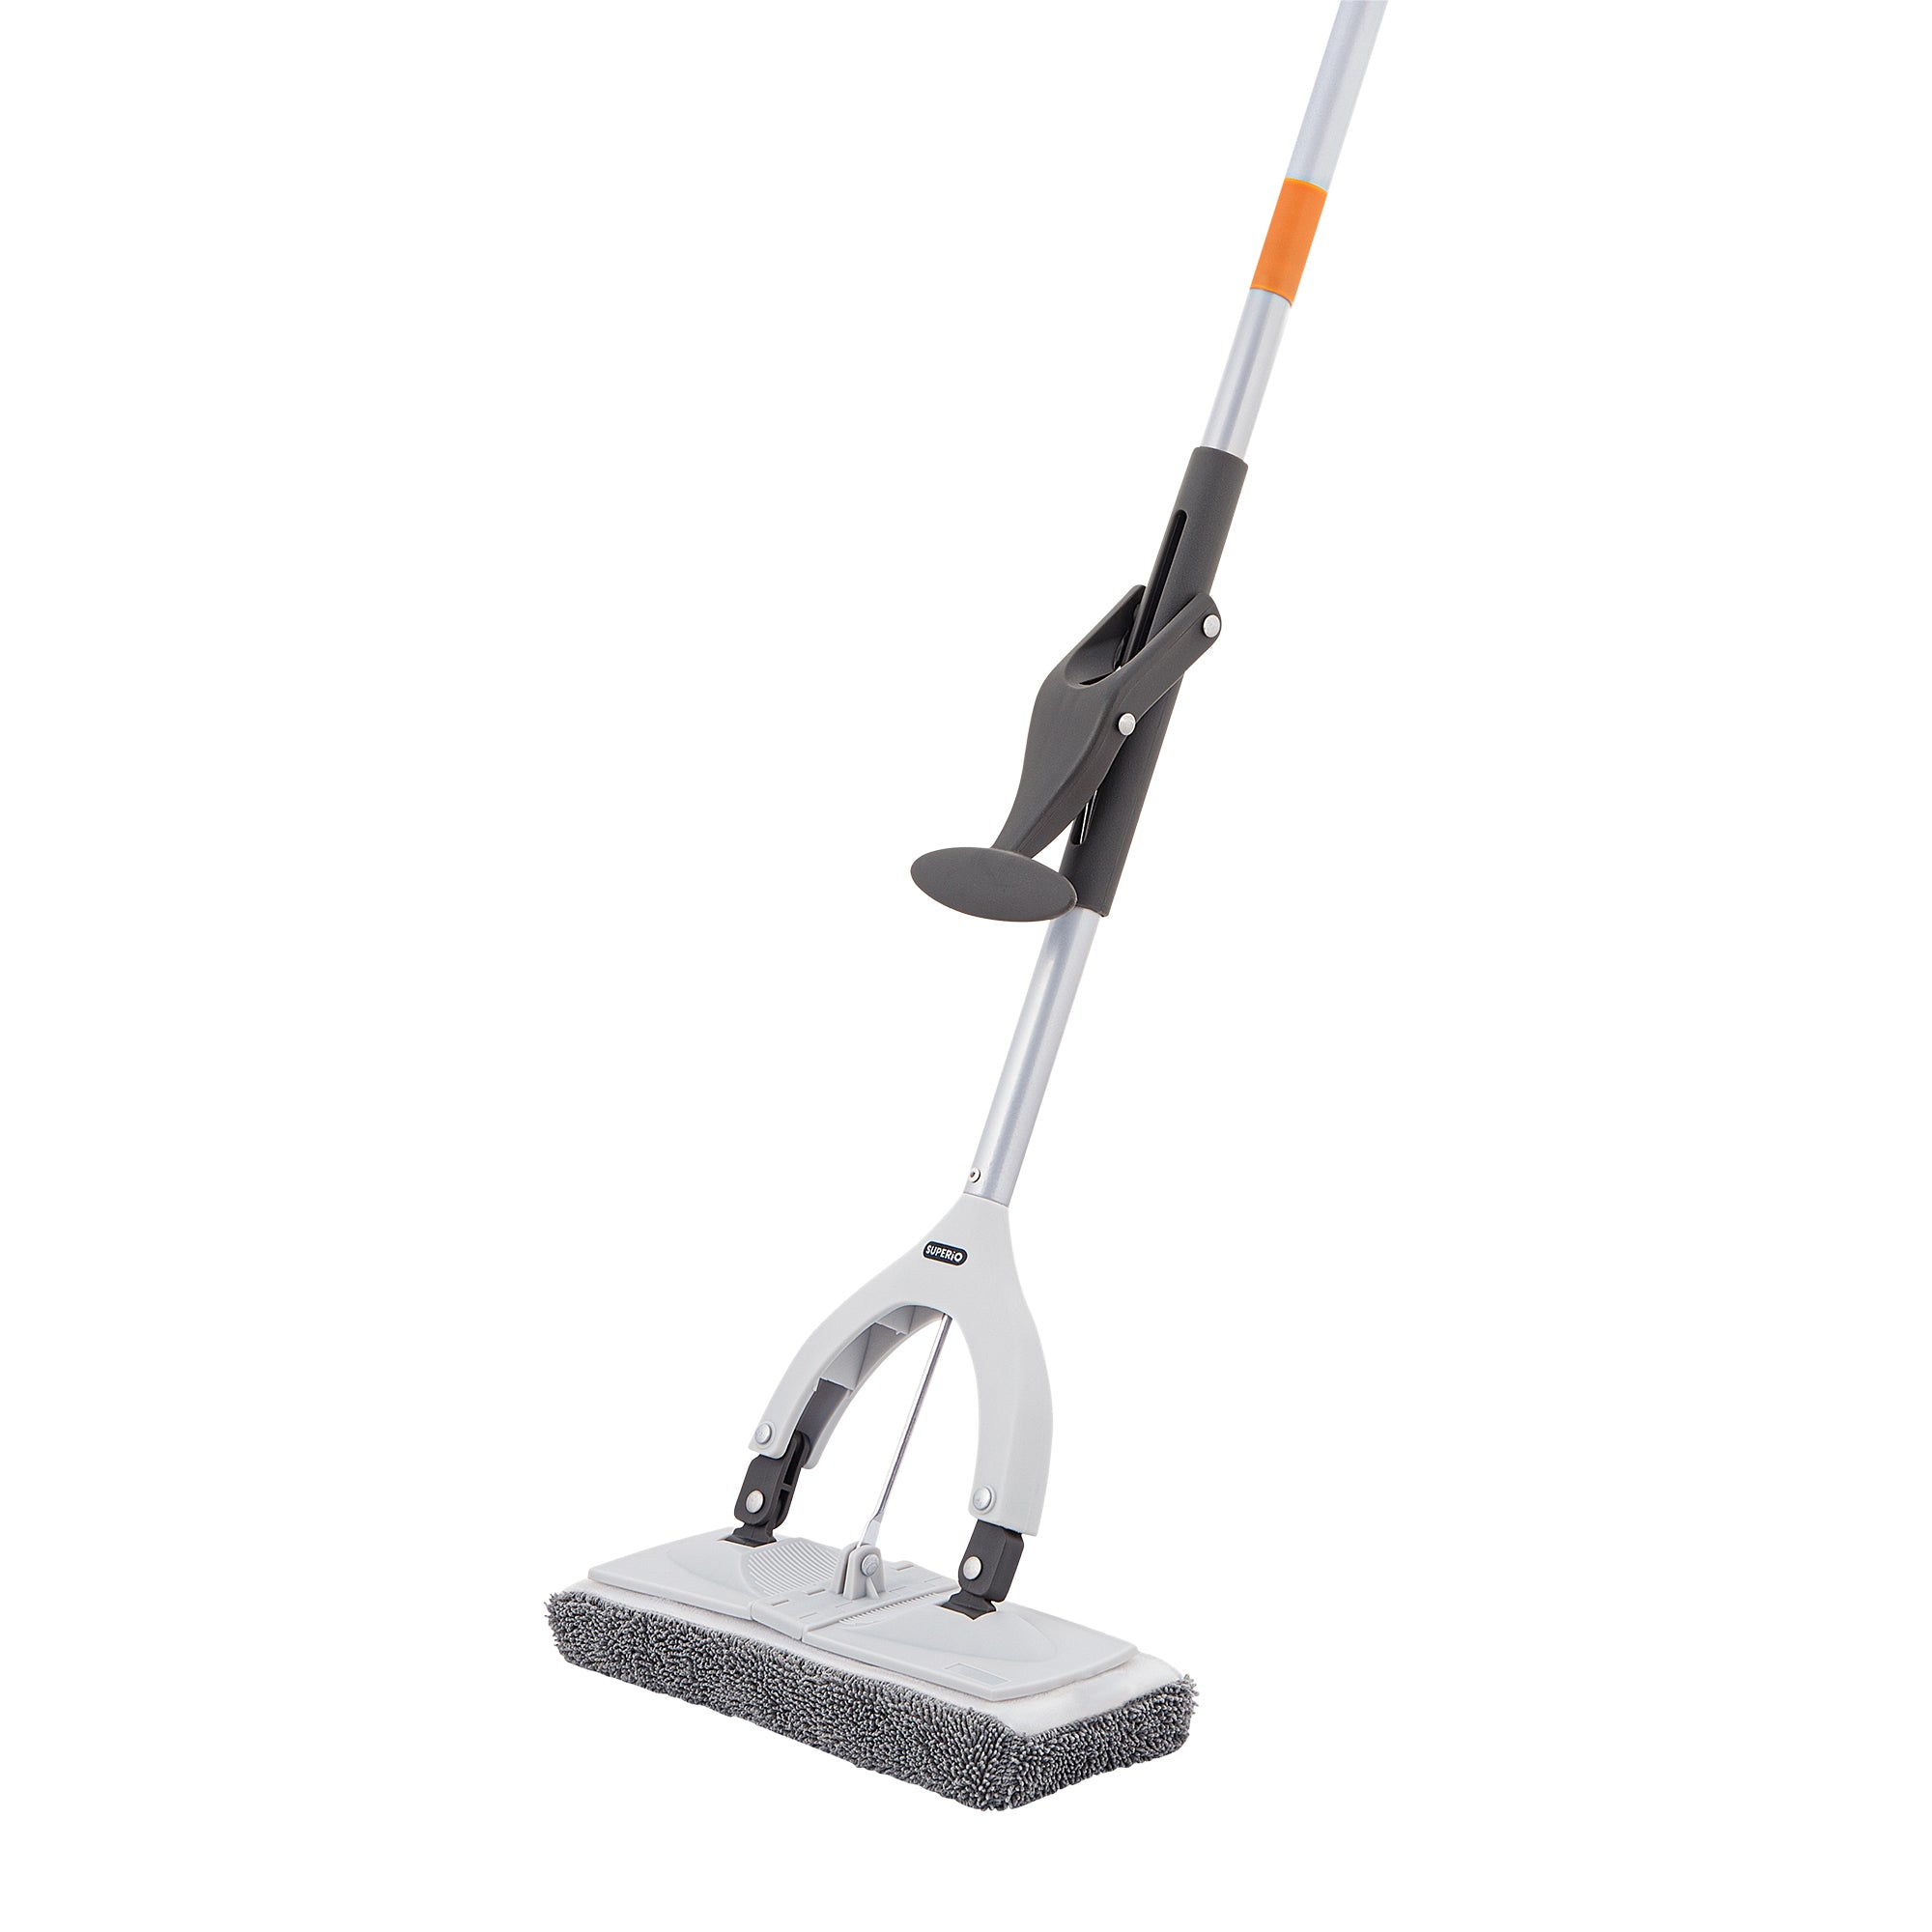 Superio Telescopic Self Wring Miracle Mop, Grey for Kitchen and Bath Cleaning, with Velcro Microfiber Pad, for Hardwood Floor, Ceramic tiles, Linoleum